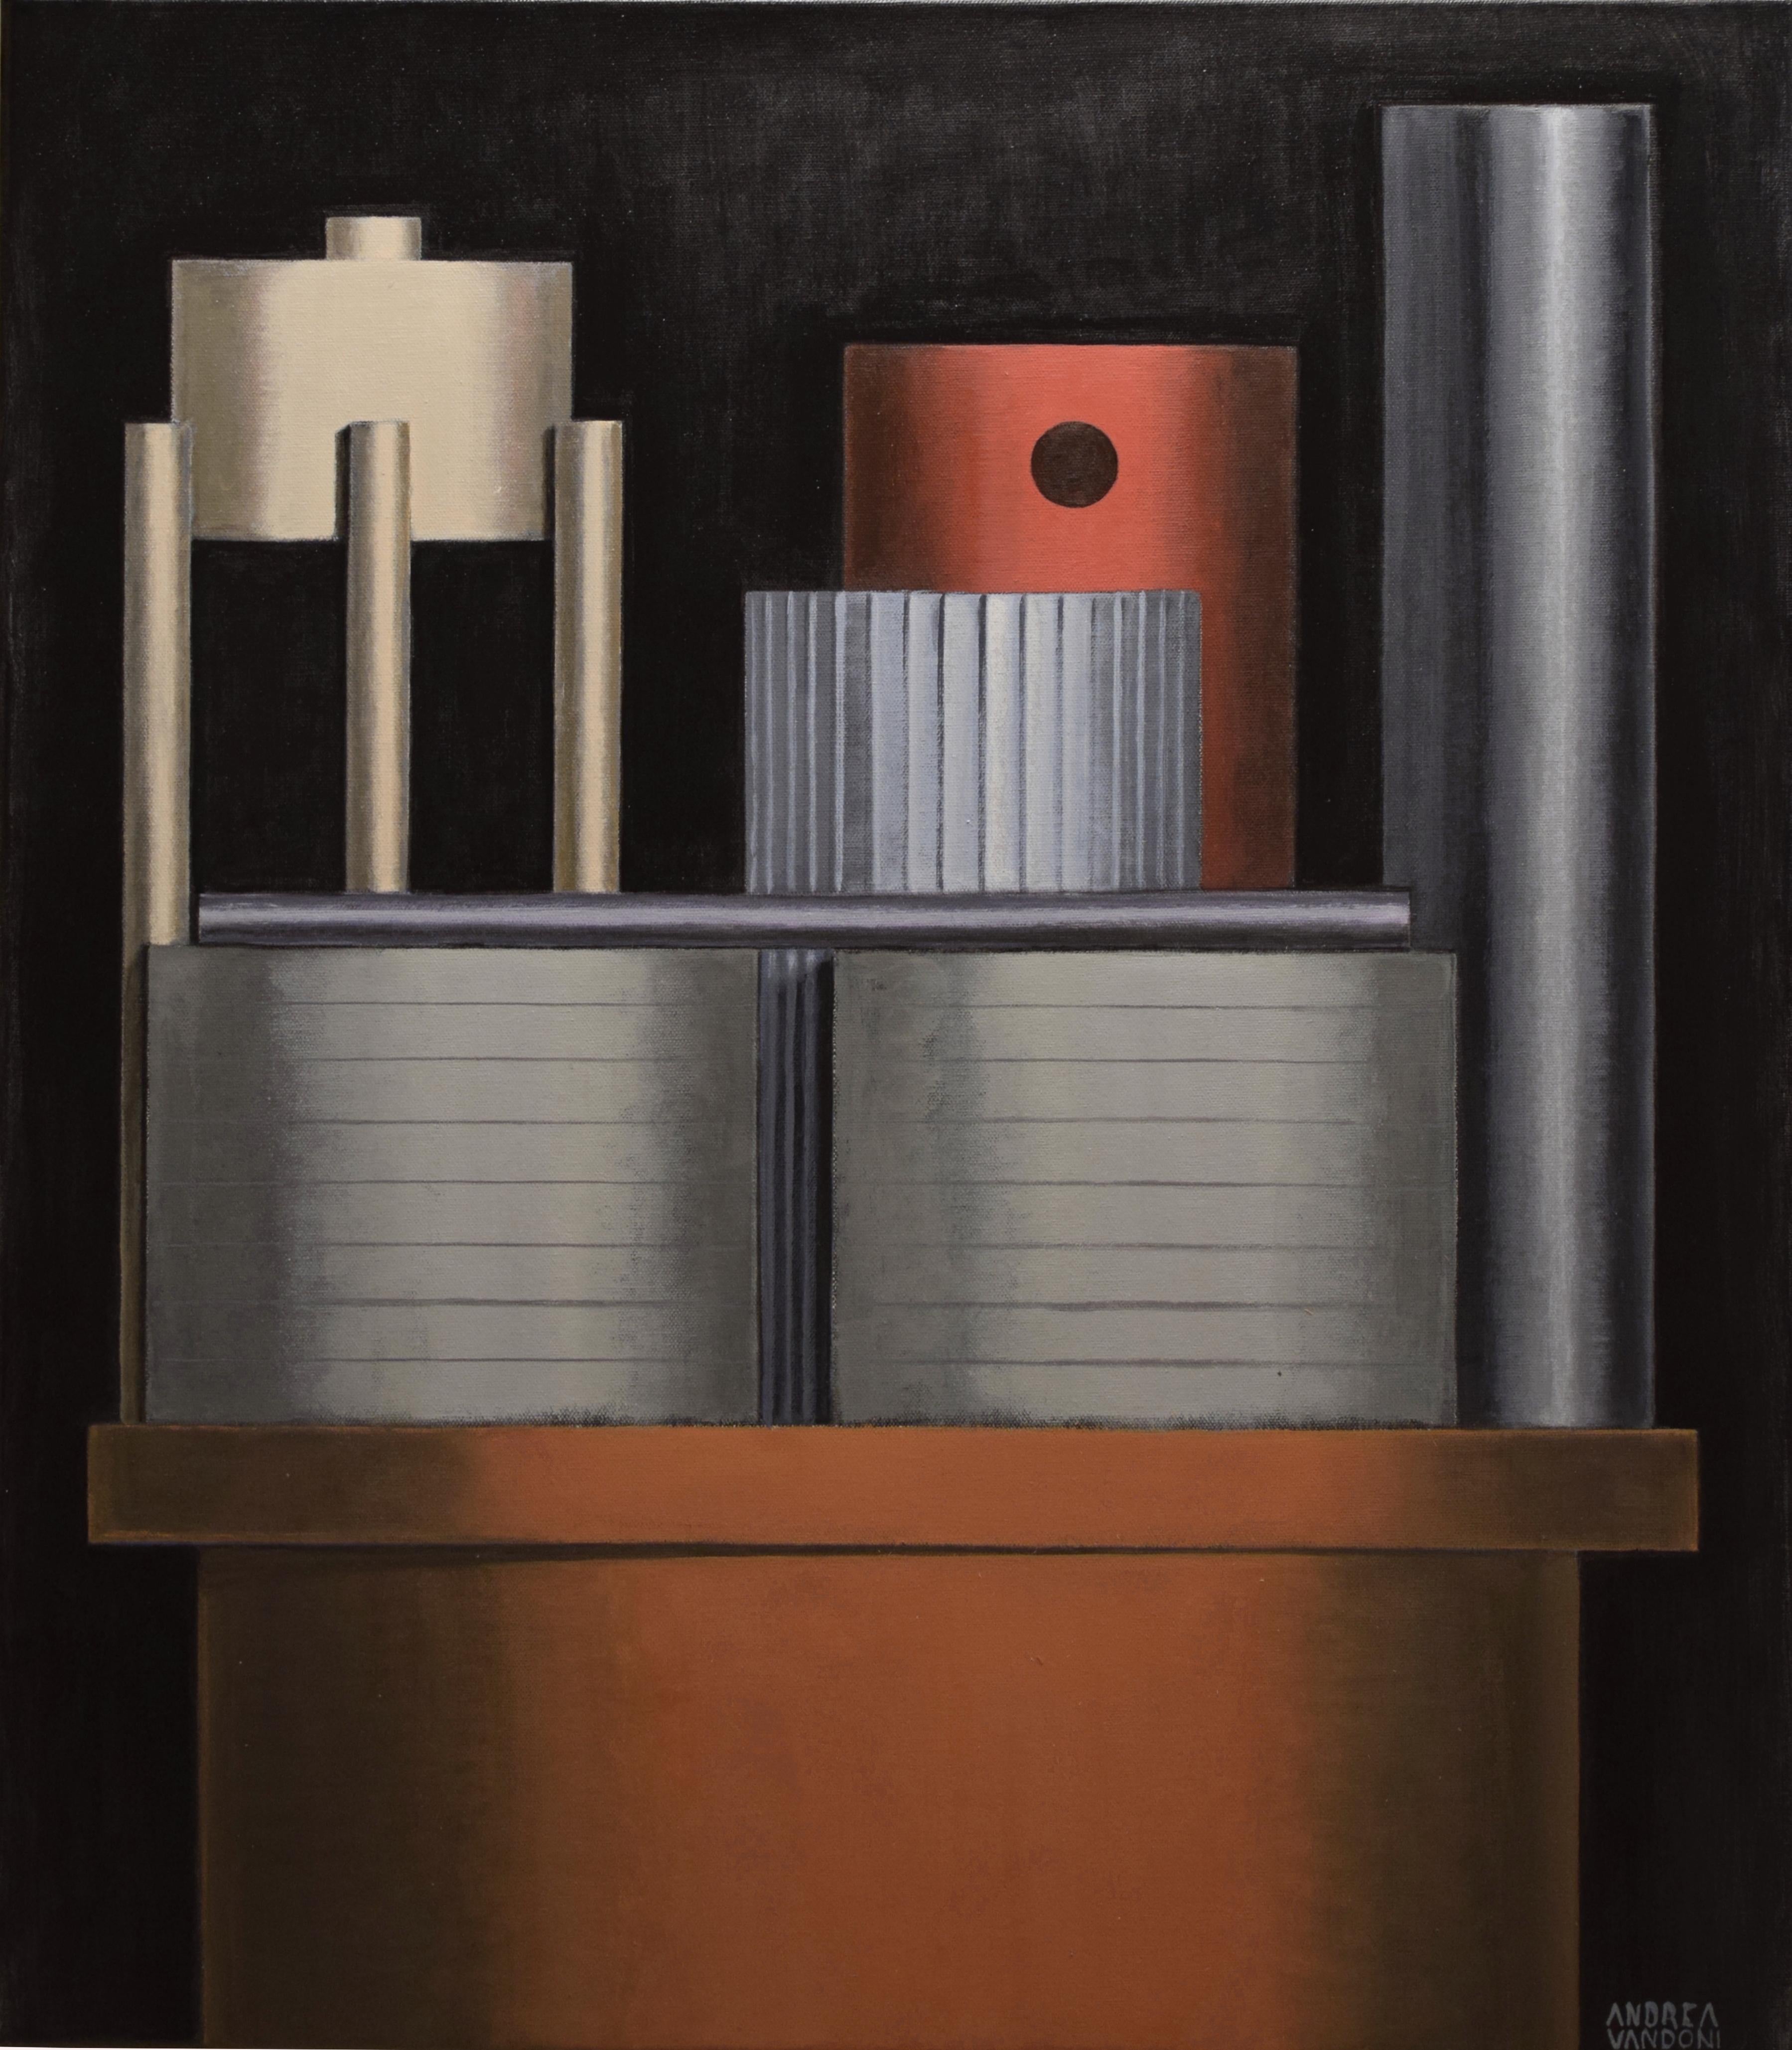 Italian Contemporary Art by Andrea Vandoni - Rectangles or Cylinders